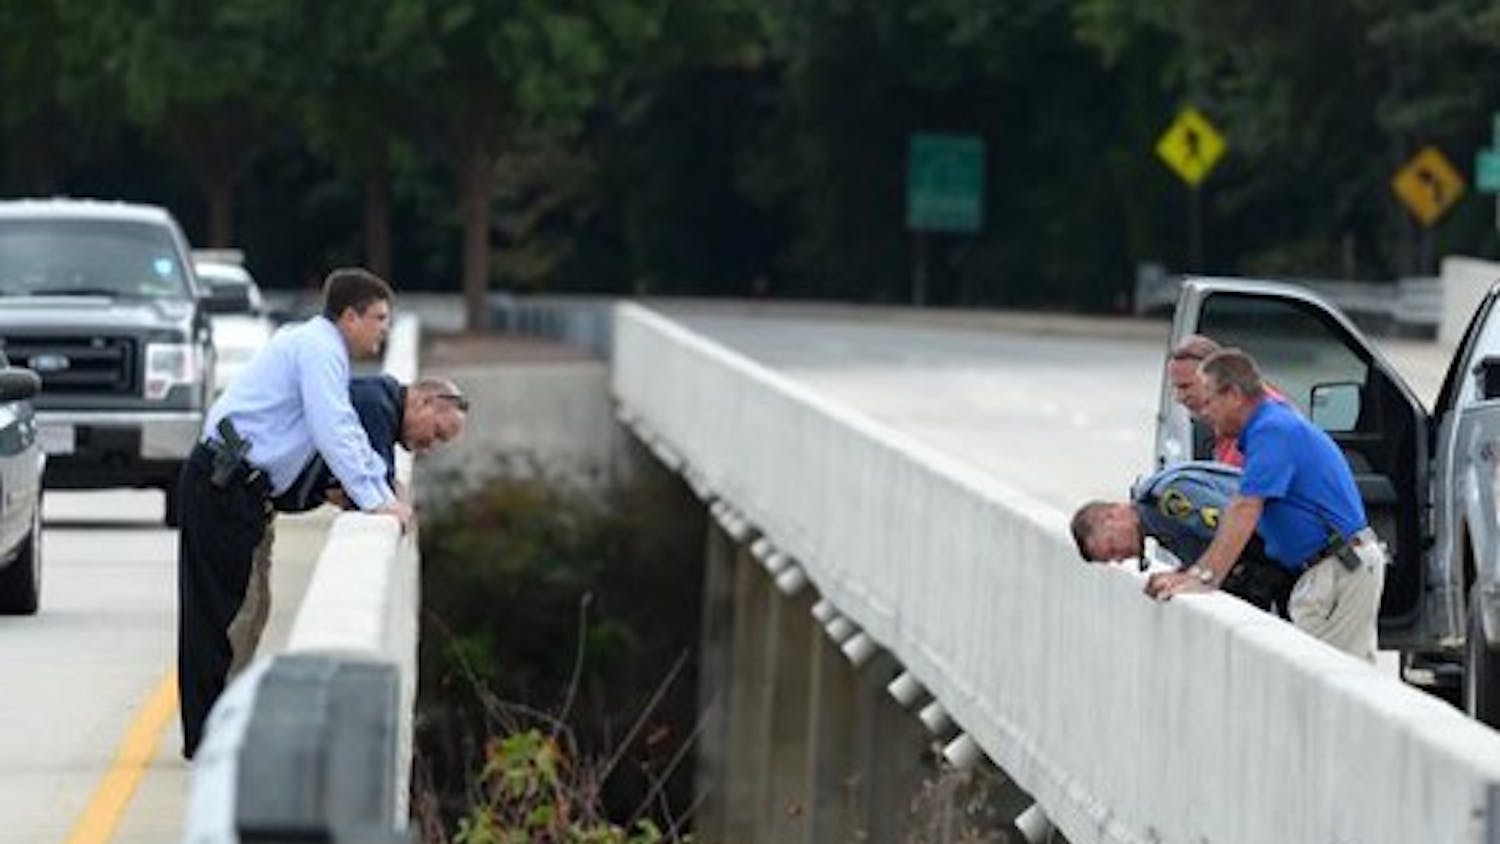 Investigators look over the bridge on State 93 over the Seneca River in Clemson Tuesday, September 23, 2014 where the body of Clemson student Tucker W. Hipps was found yesterday.